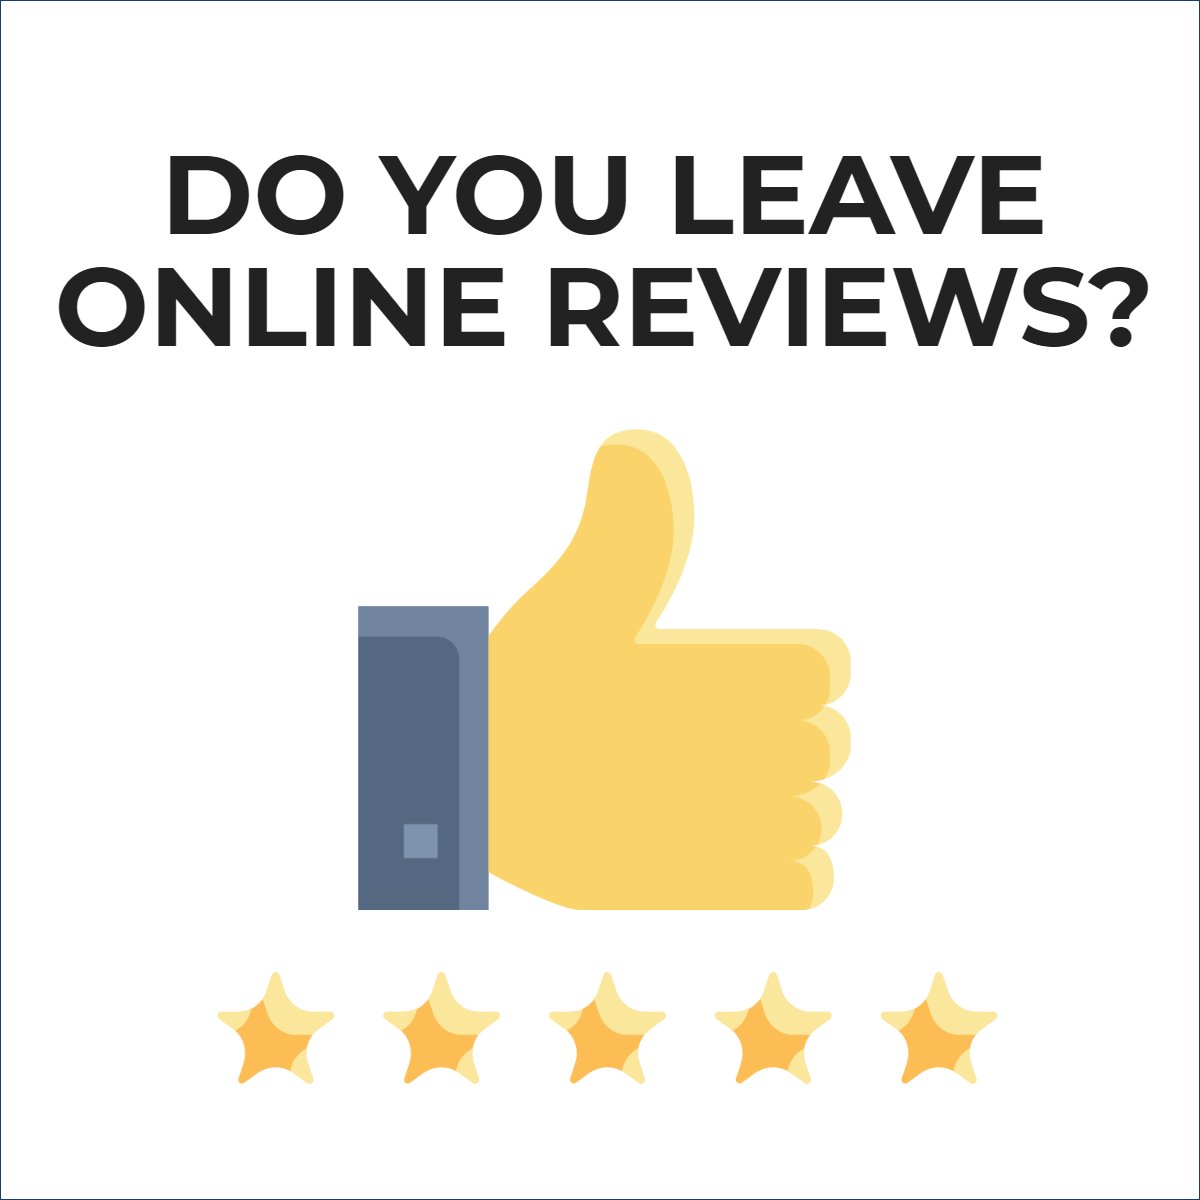 Did you know that 90% of consumers read online reviews before visiting a business? 😉

#onlinereviews #onlinereviewsmatter #realestate #realestatecoach #digitalmarketing #reviews #reputation 
 #realestate #realtor #niagara #oakville #halton #stcatharines